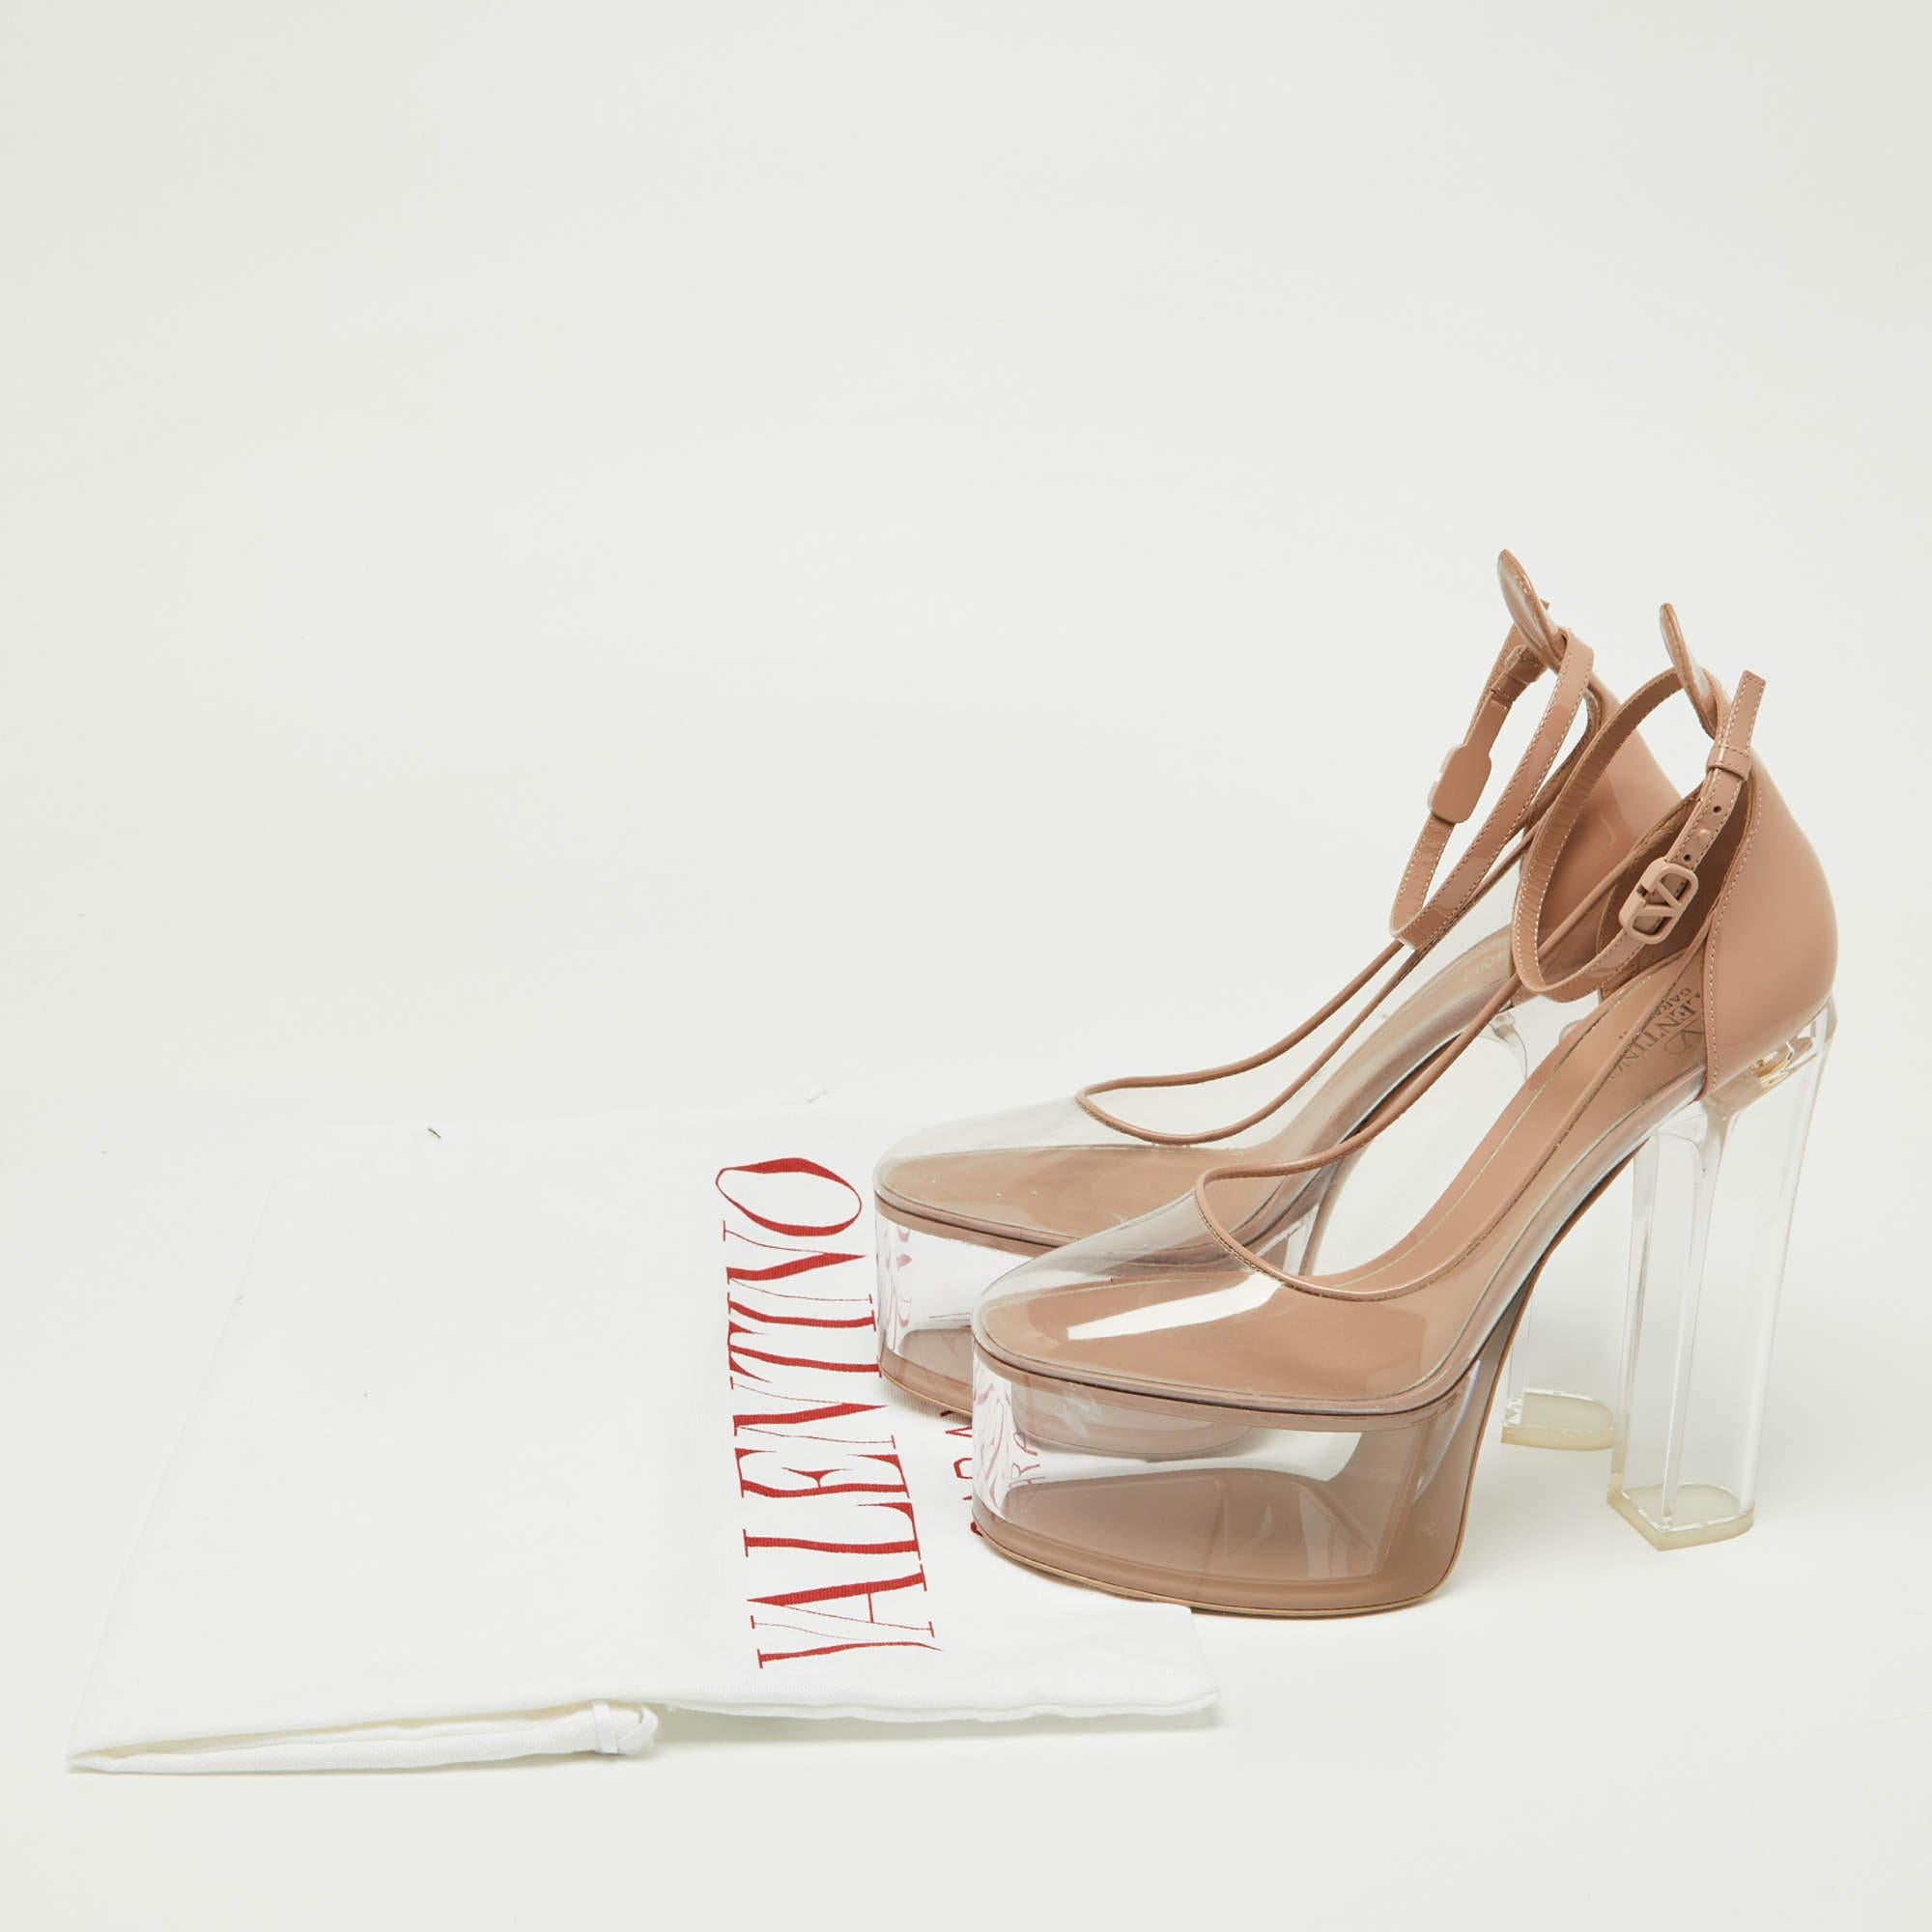 Valentino Transparent/Pink Pvc and Patent Leather Ankle Strap Pumps Size 38 4